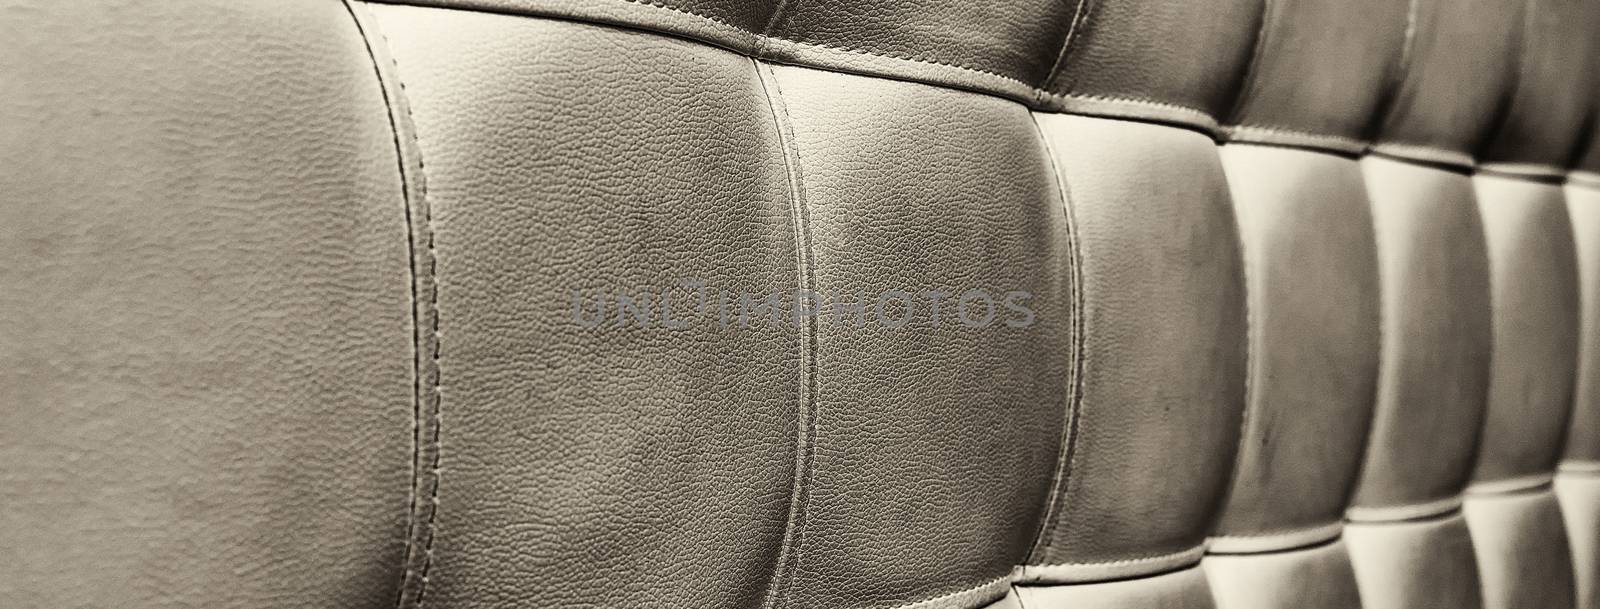 Tufted grey leather headboard texture, used for background